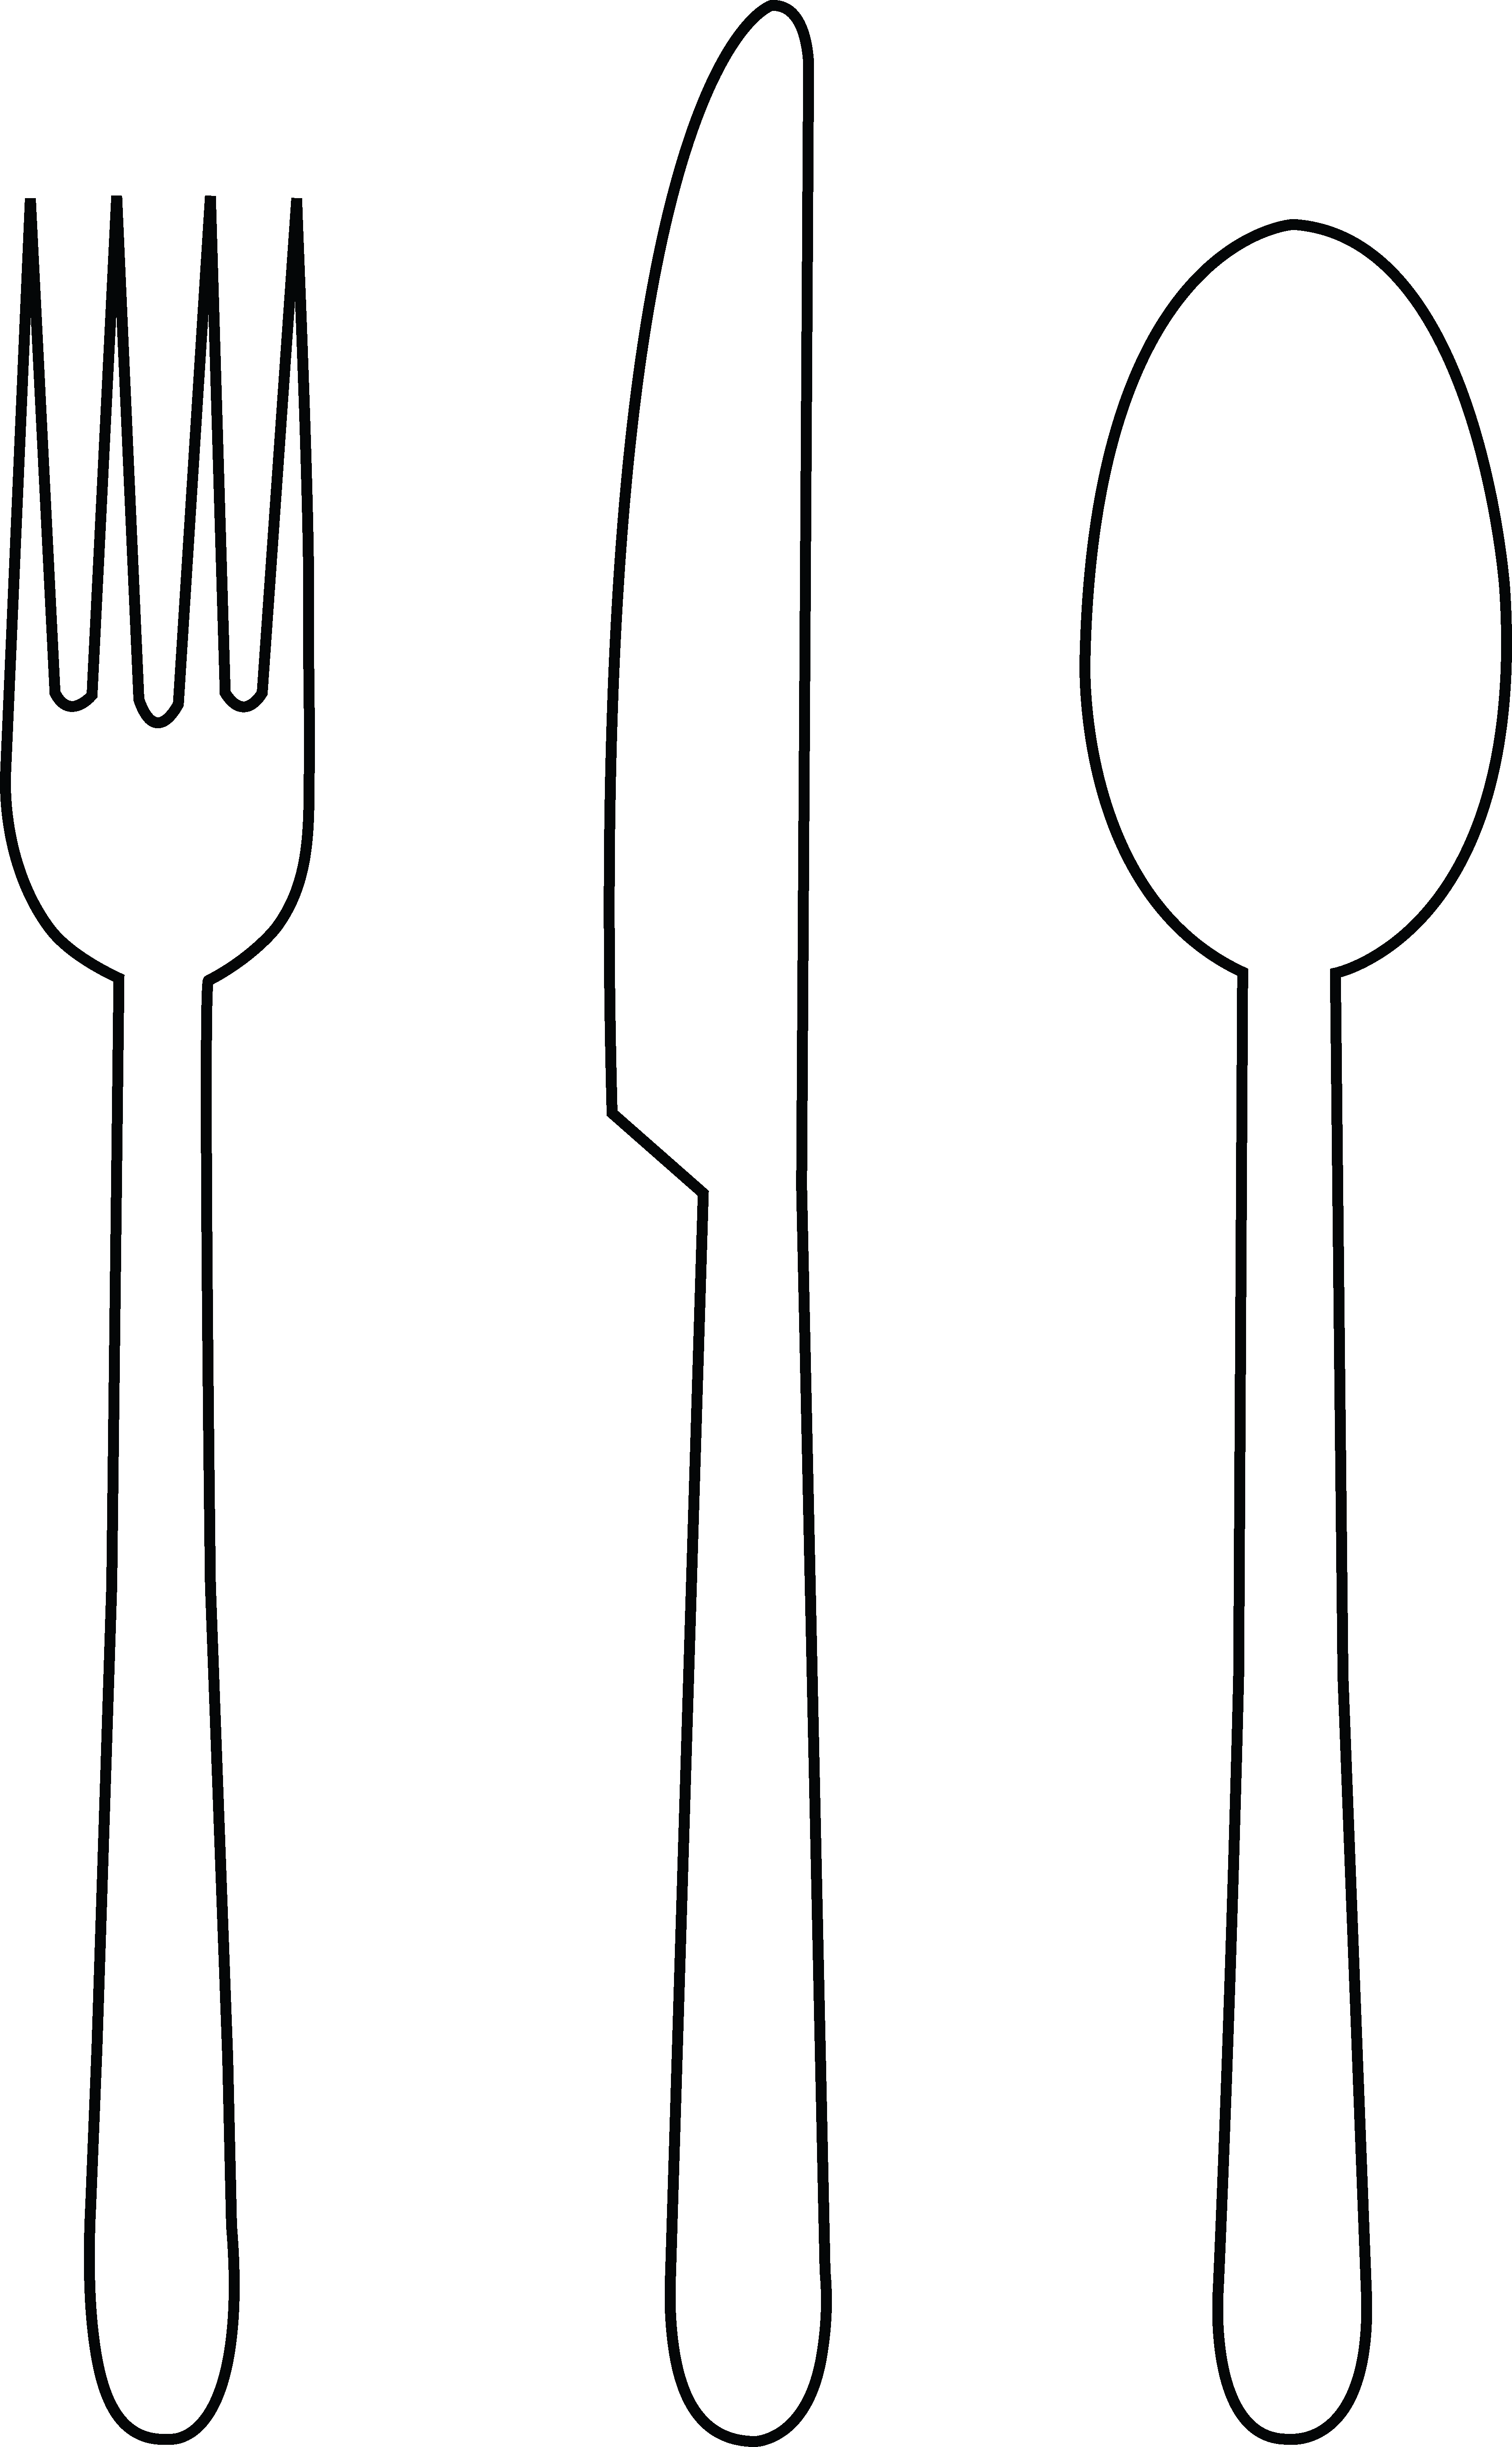 Table with fork and knife clipart